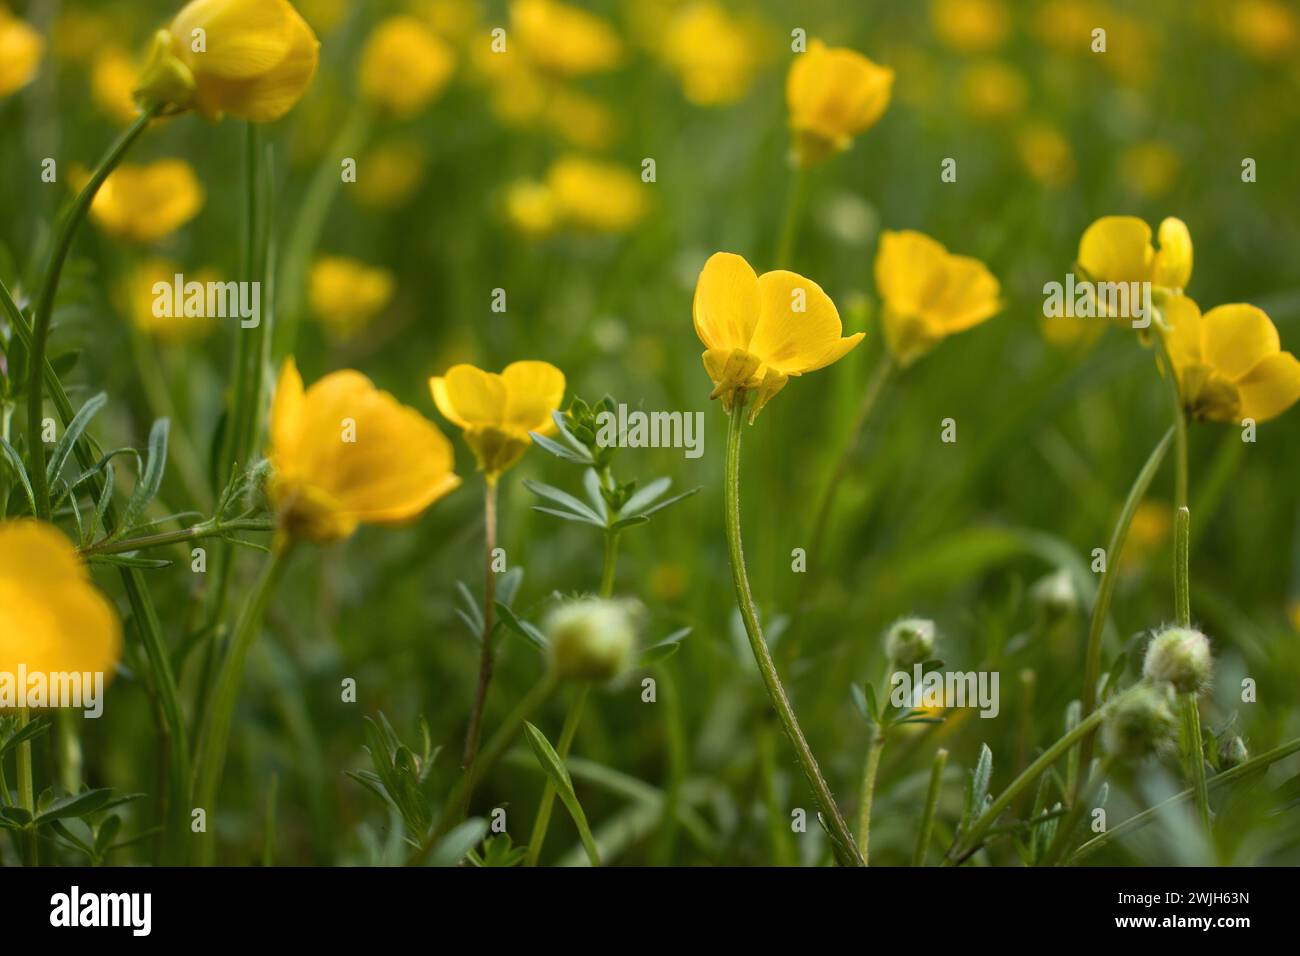 Small yellow flowers growing in green grass on a spring day near Bad Munster, Germany. Stock Photo